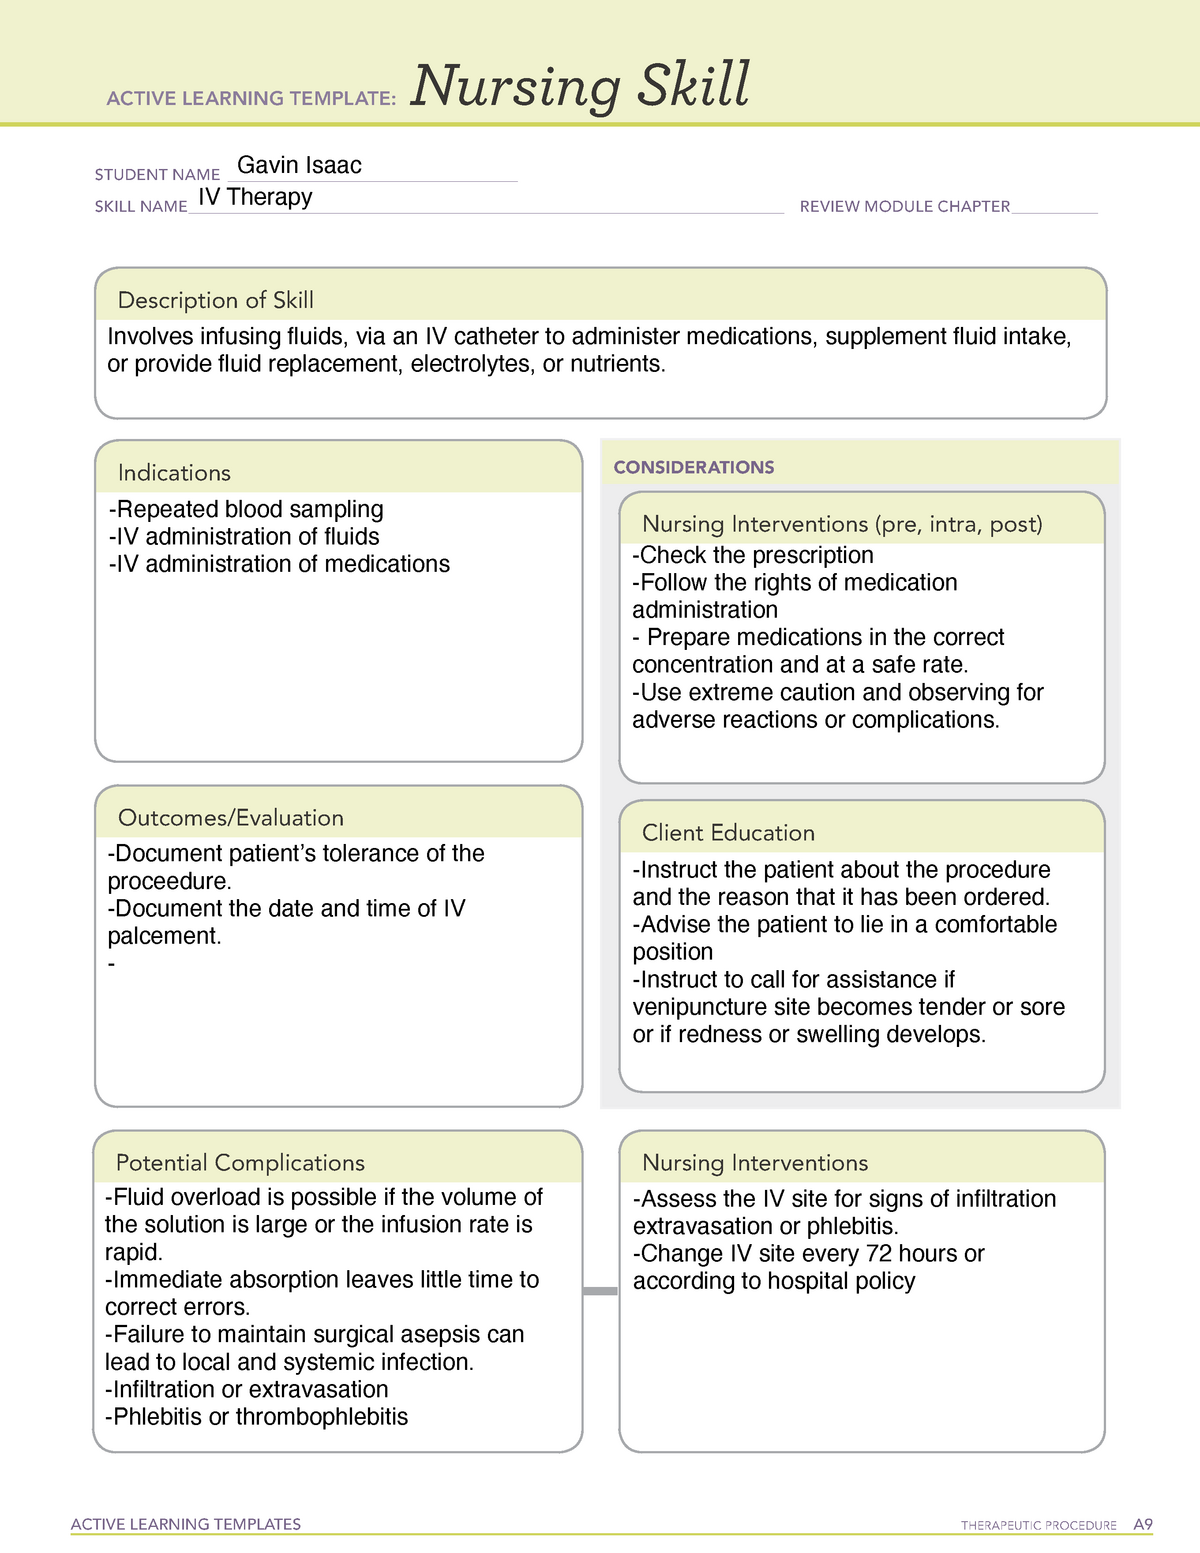 Skill IVTherapy Active Learning Template ACTIVE LEARNING TEMPLATES